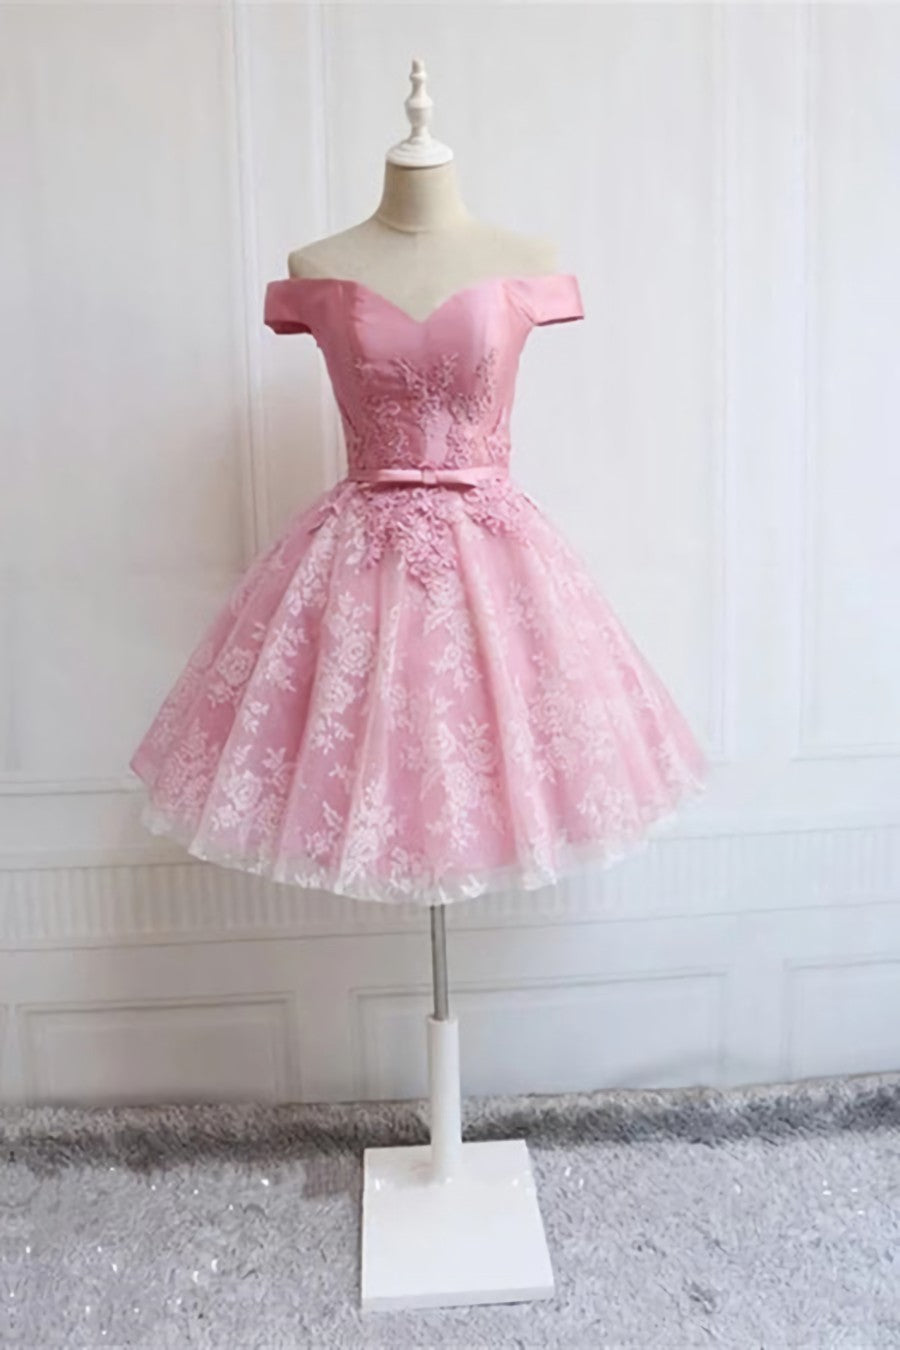 Party Dress Up Ideas Halloween Costumes, Off the Shoulder Short Pink Lace Prom Dresses, Short Pink Lace Graduation Homecoming Dresses